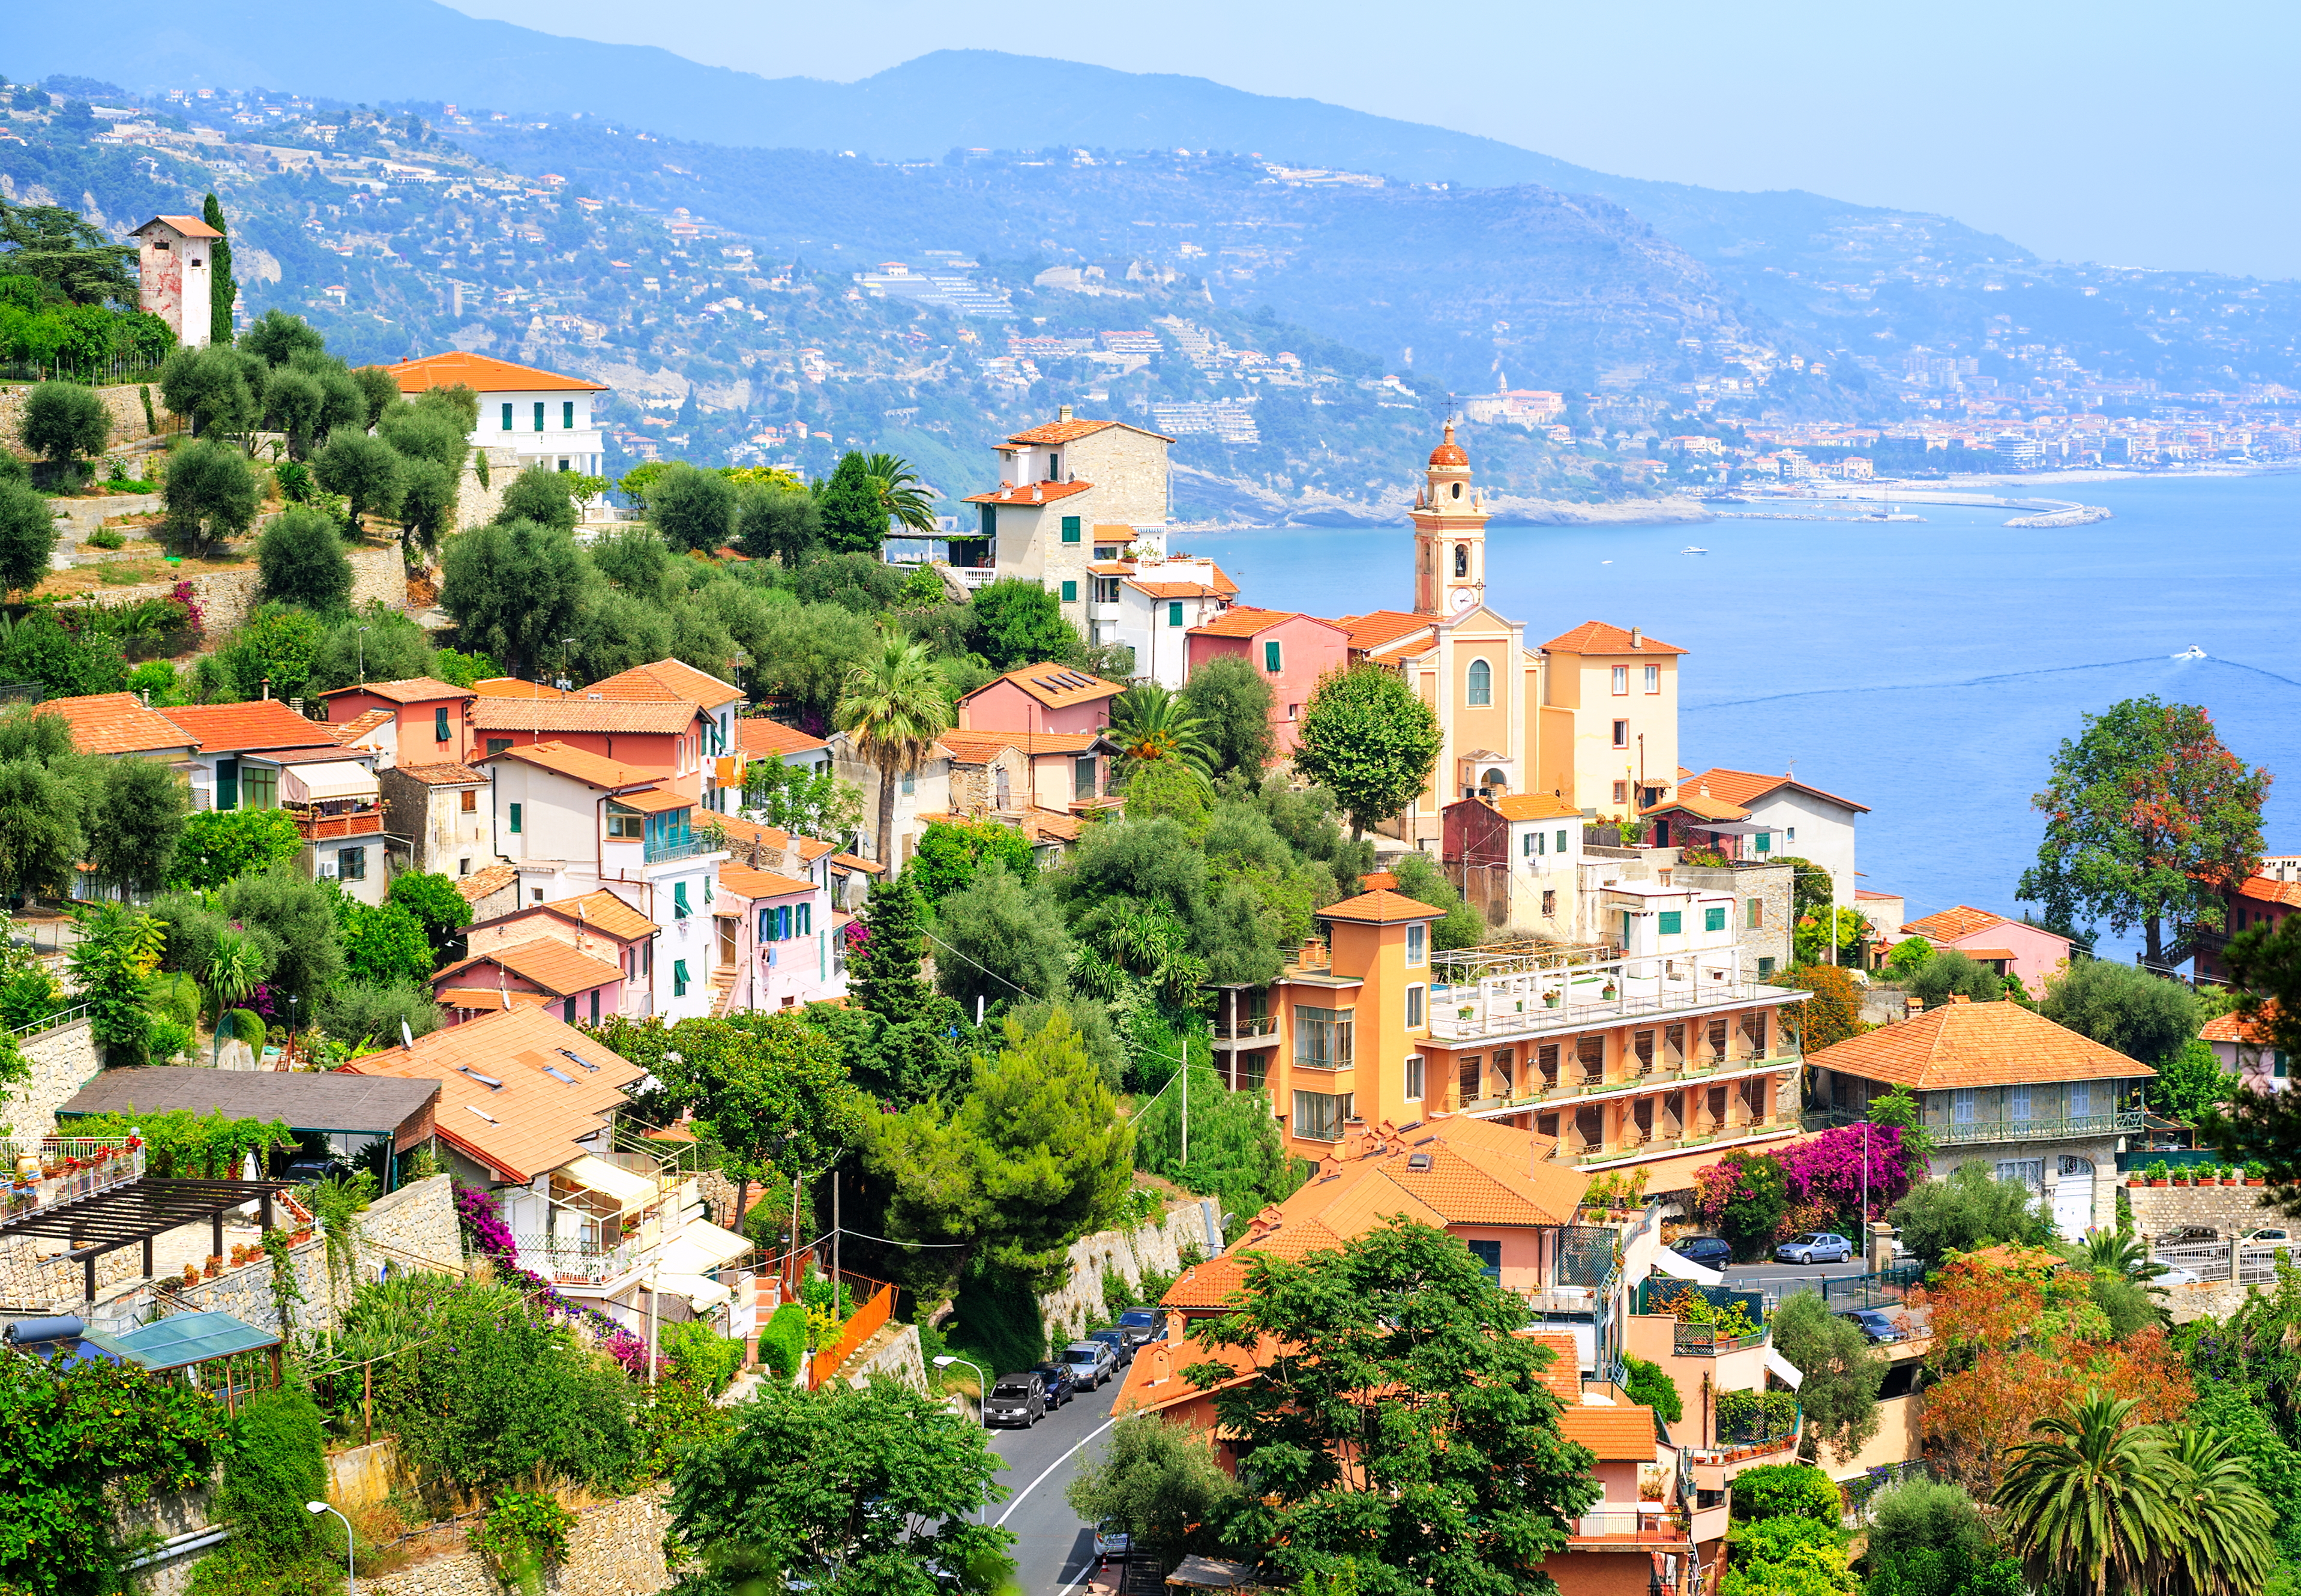 Flights to the French Riviera in the $400s round-trip